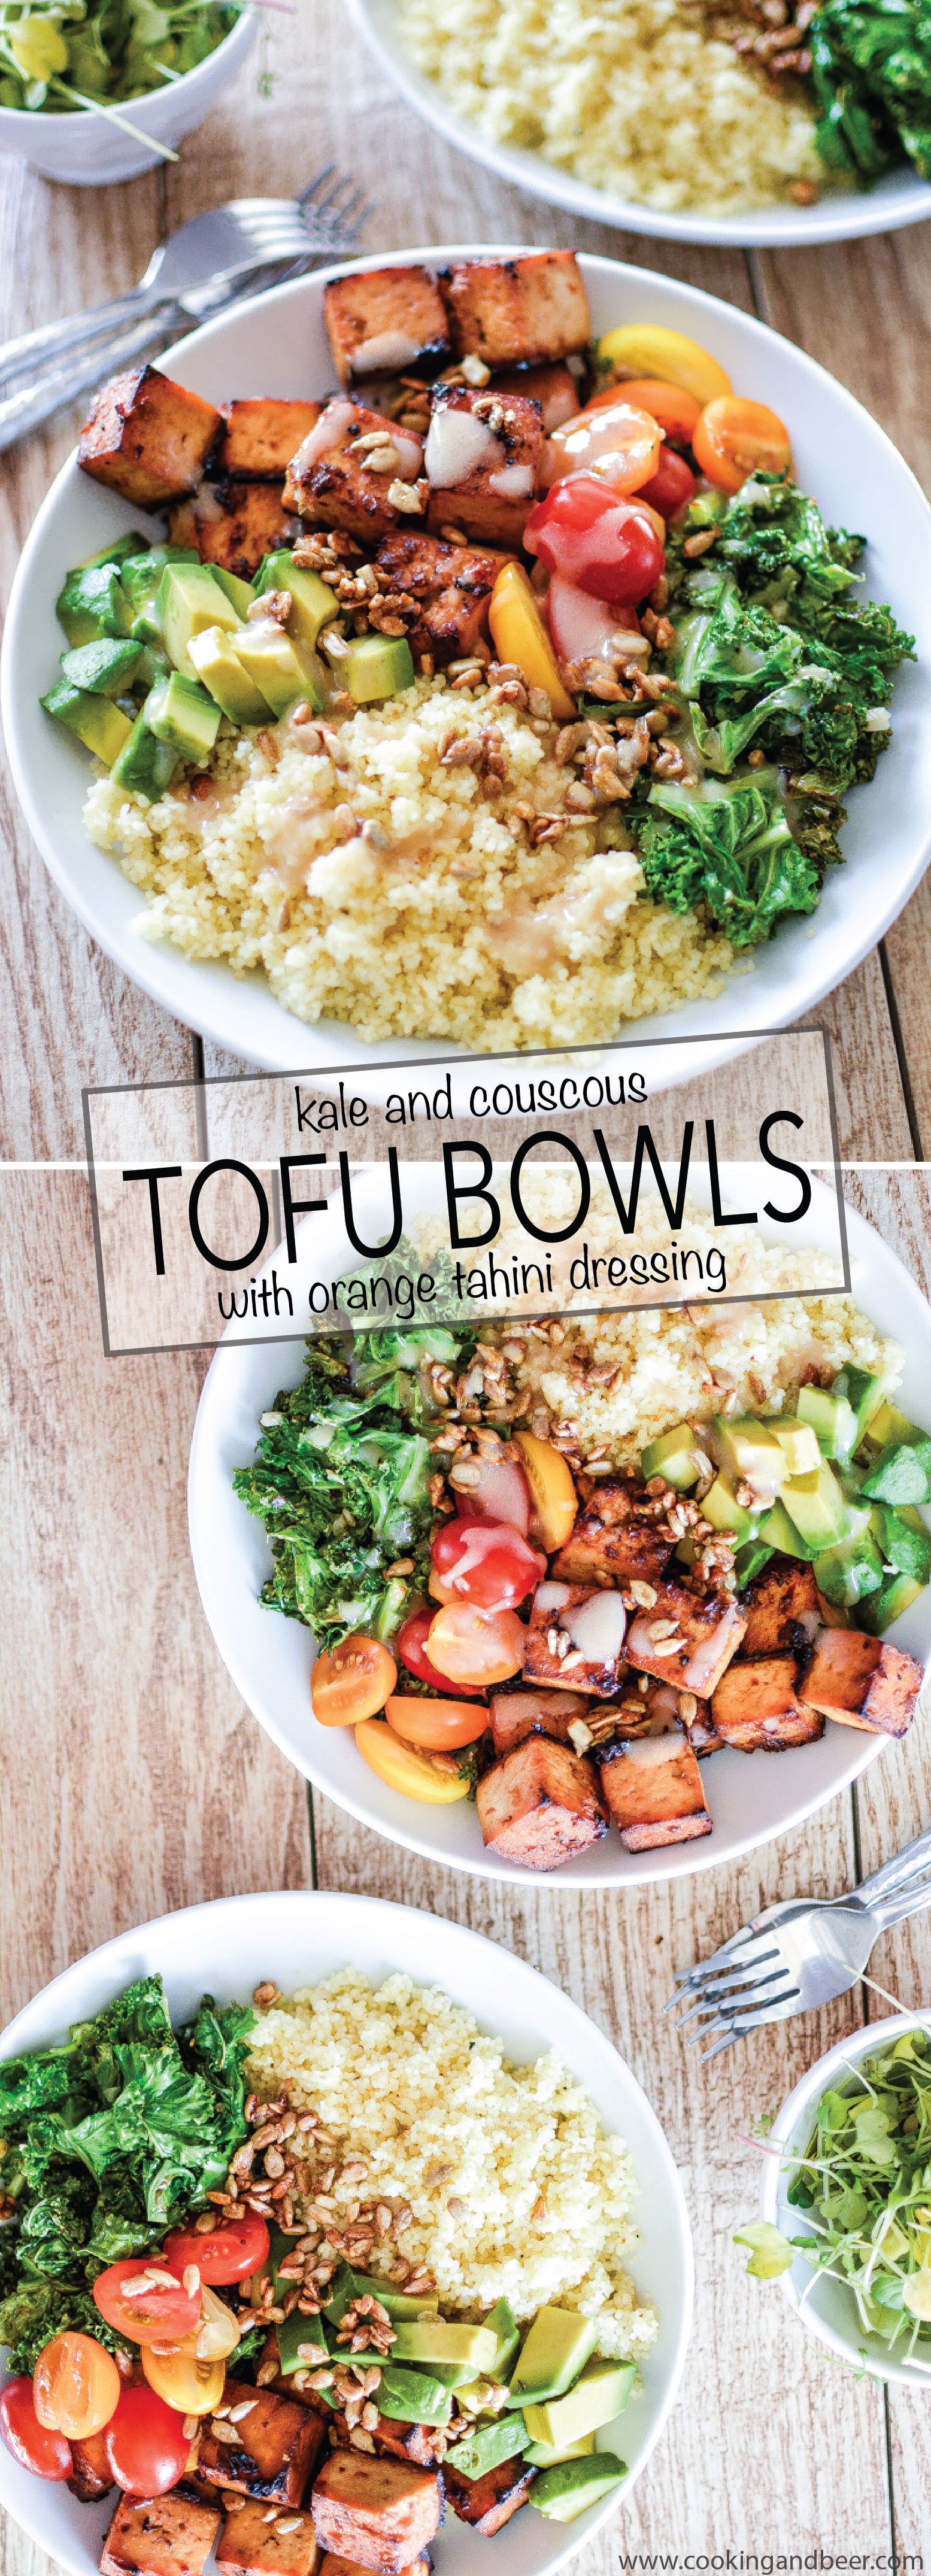 Kale and Couscous Tofu Bowls with Orange Tahini Dressing is a weeknight dinner recipe that is super hearty, filling and packs a lot of flavor! | www.cookingandbeer.com